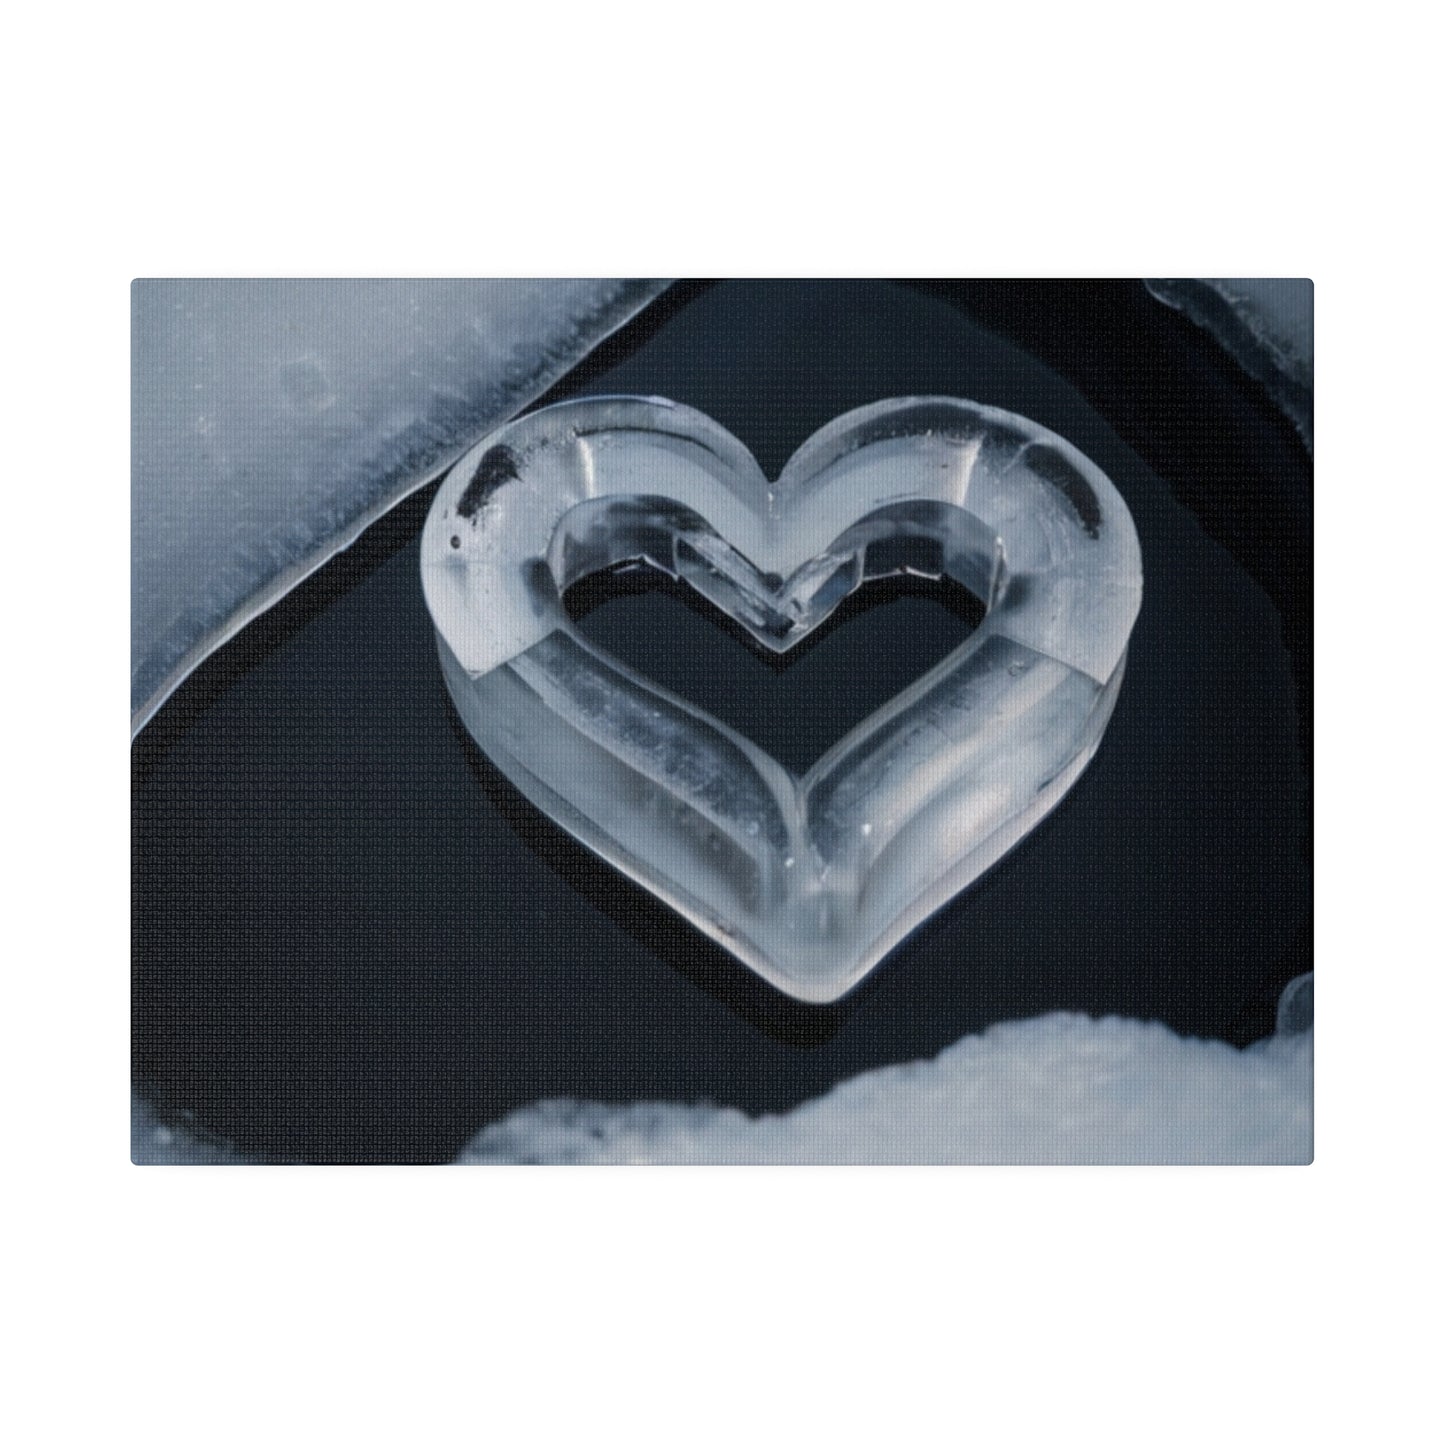 Small Ice Love Heart - Matte Canvas, Stretched, 0.75"